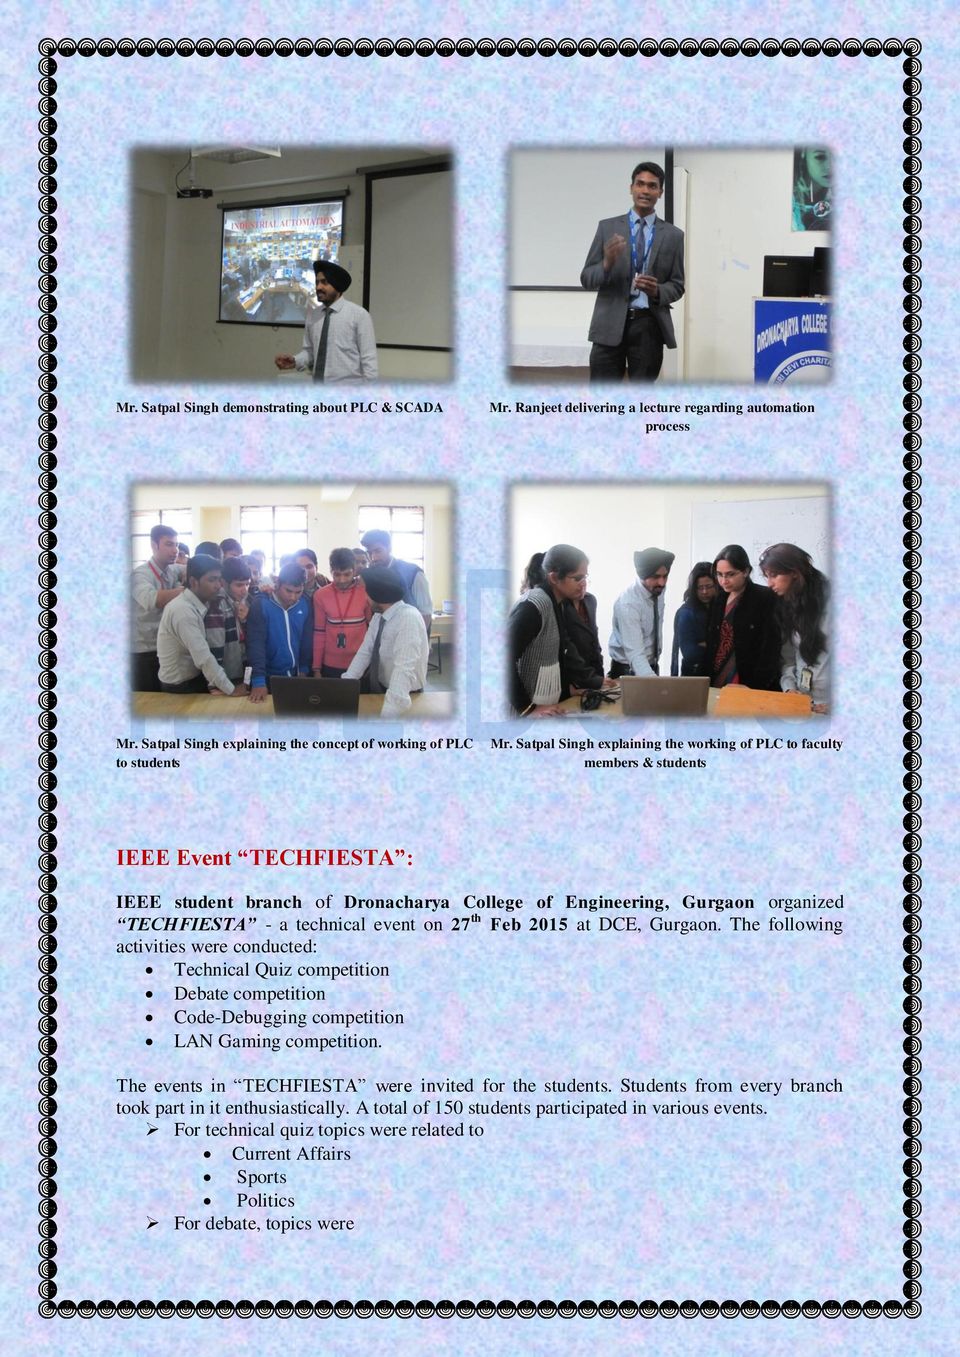 event on 27 th Feb 2015 at DCE, Gurgaon. The following activities were conducted: Technical Quiz competition Debate competition Code-Debugging competition LAN Gaming competition.